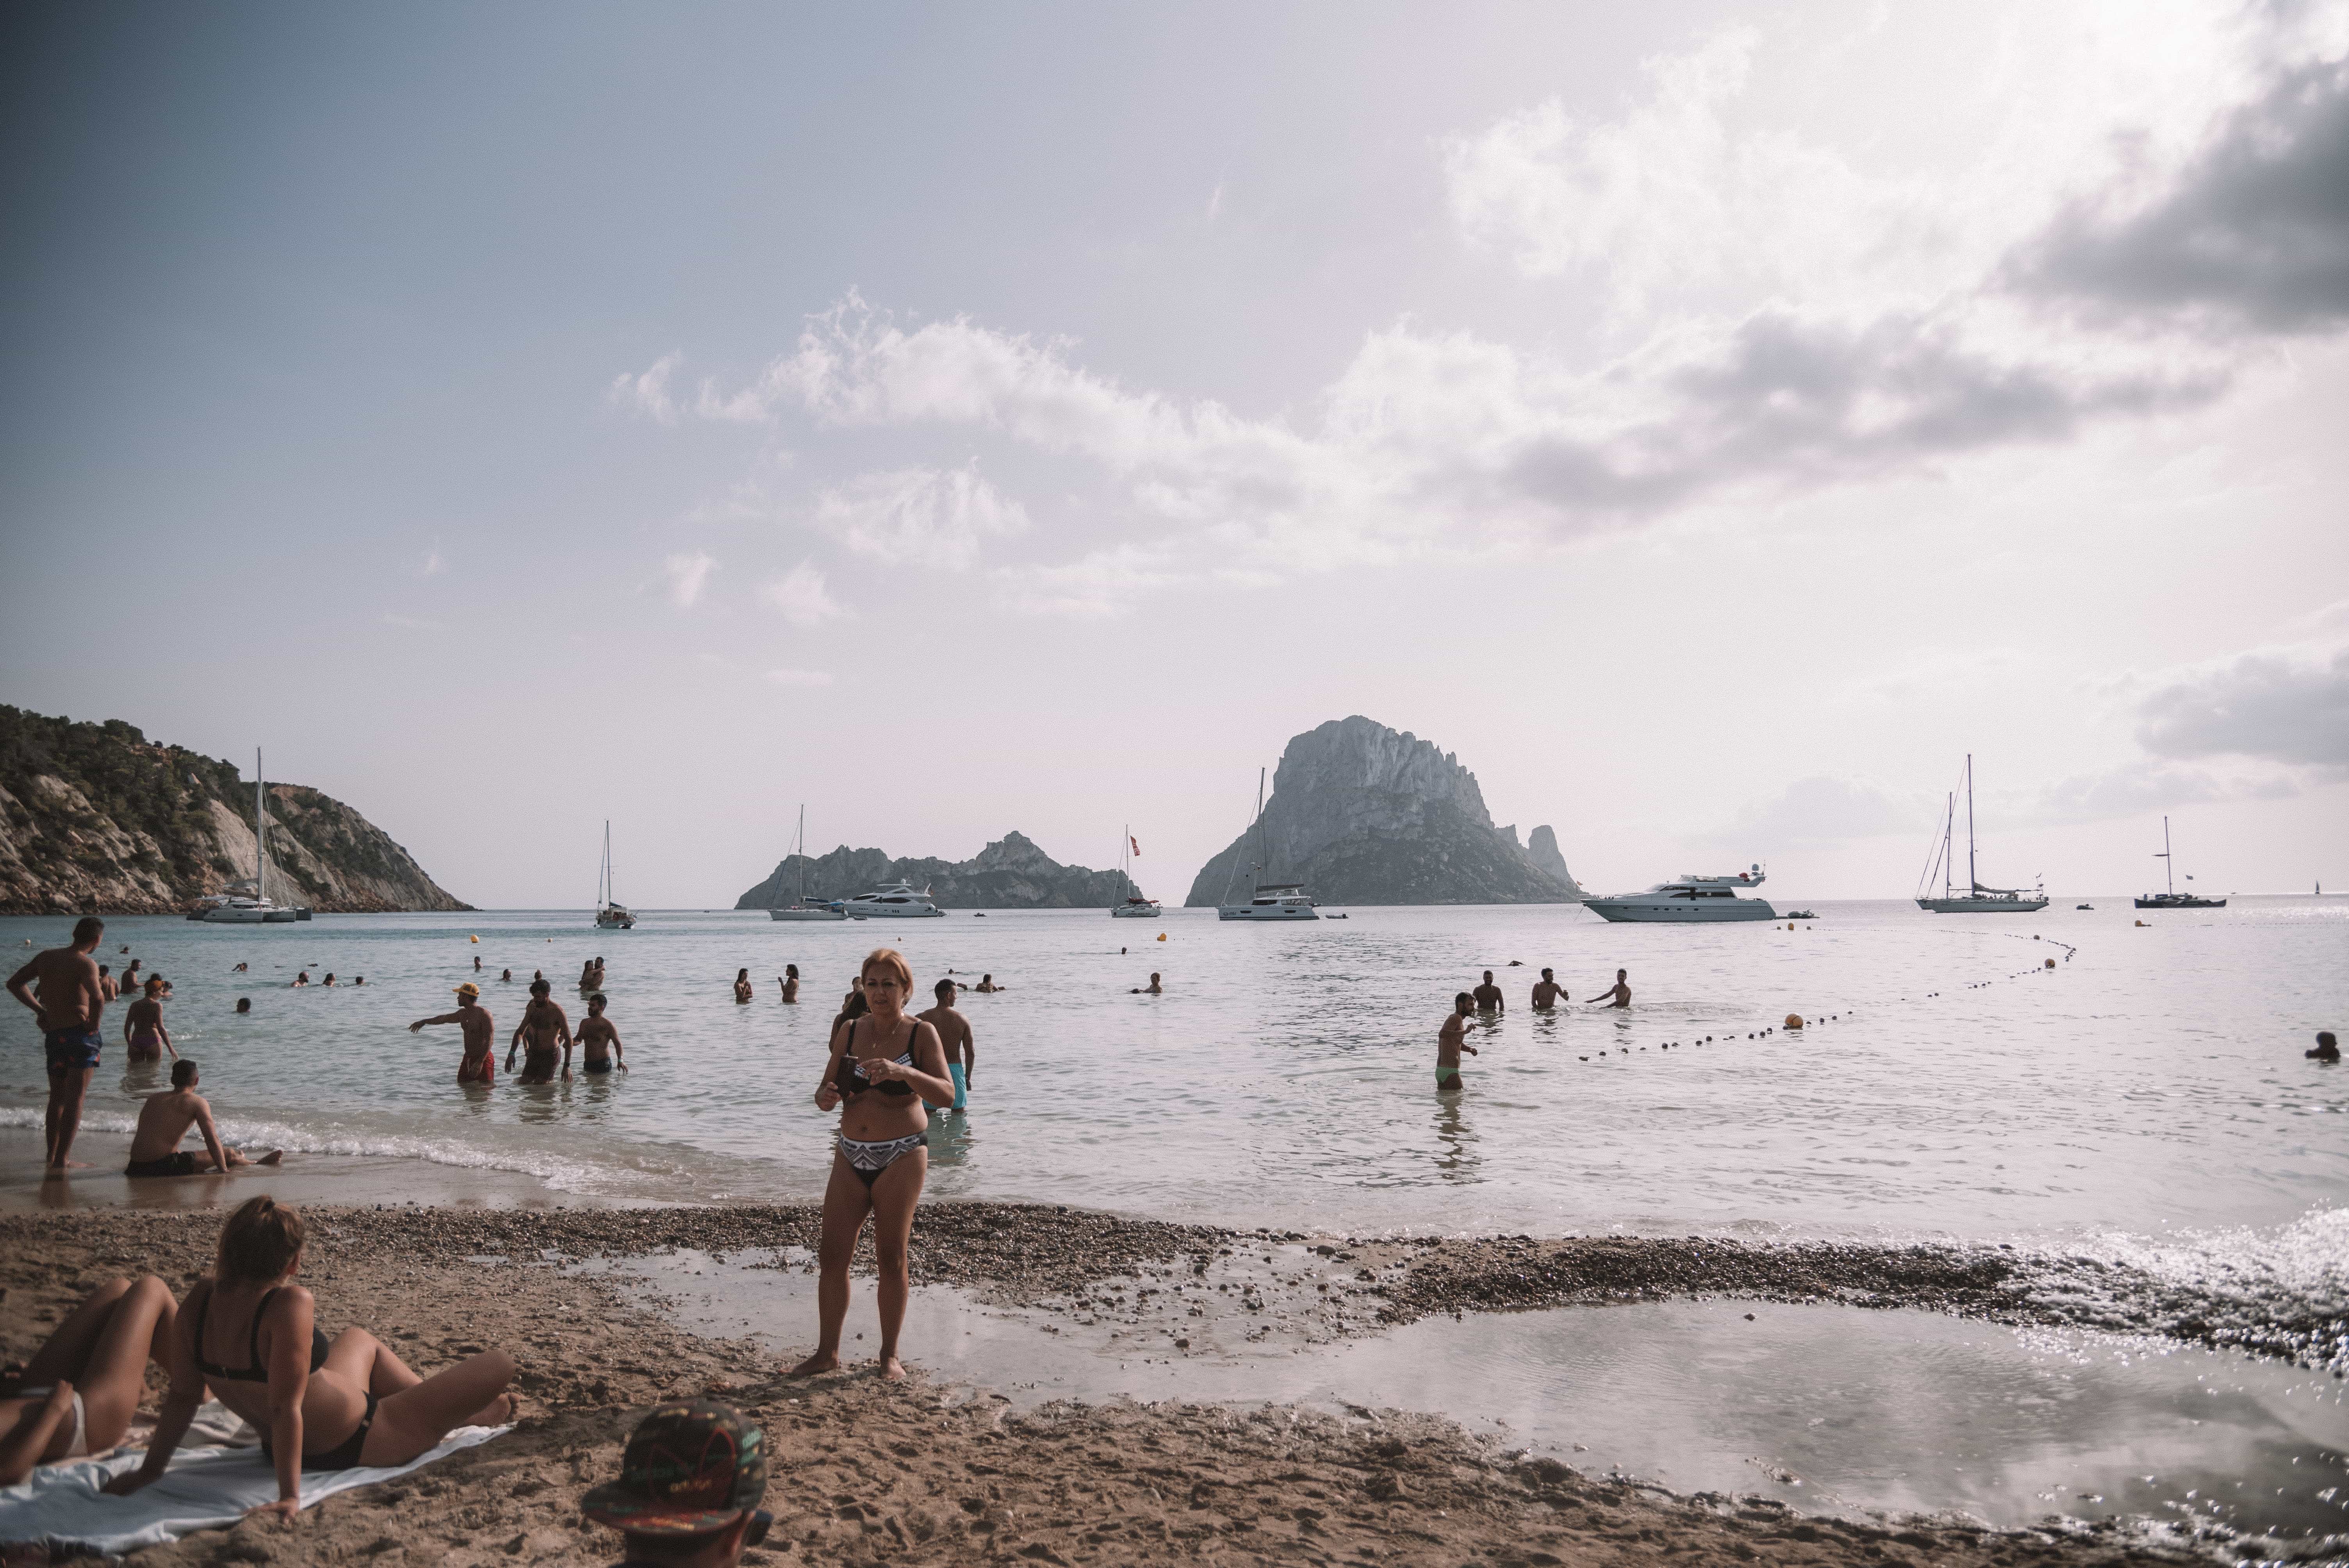 things to do in Ibiza, places to visit in Ibiza, festivals in Ibiza, best time to visit Ibiza, daily budget in Ibiza, food to try in Ibiza, how to get to Ibiza, road trip Ibiza, beaches  in Ibiza